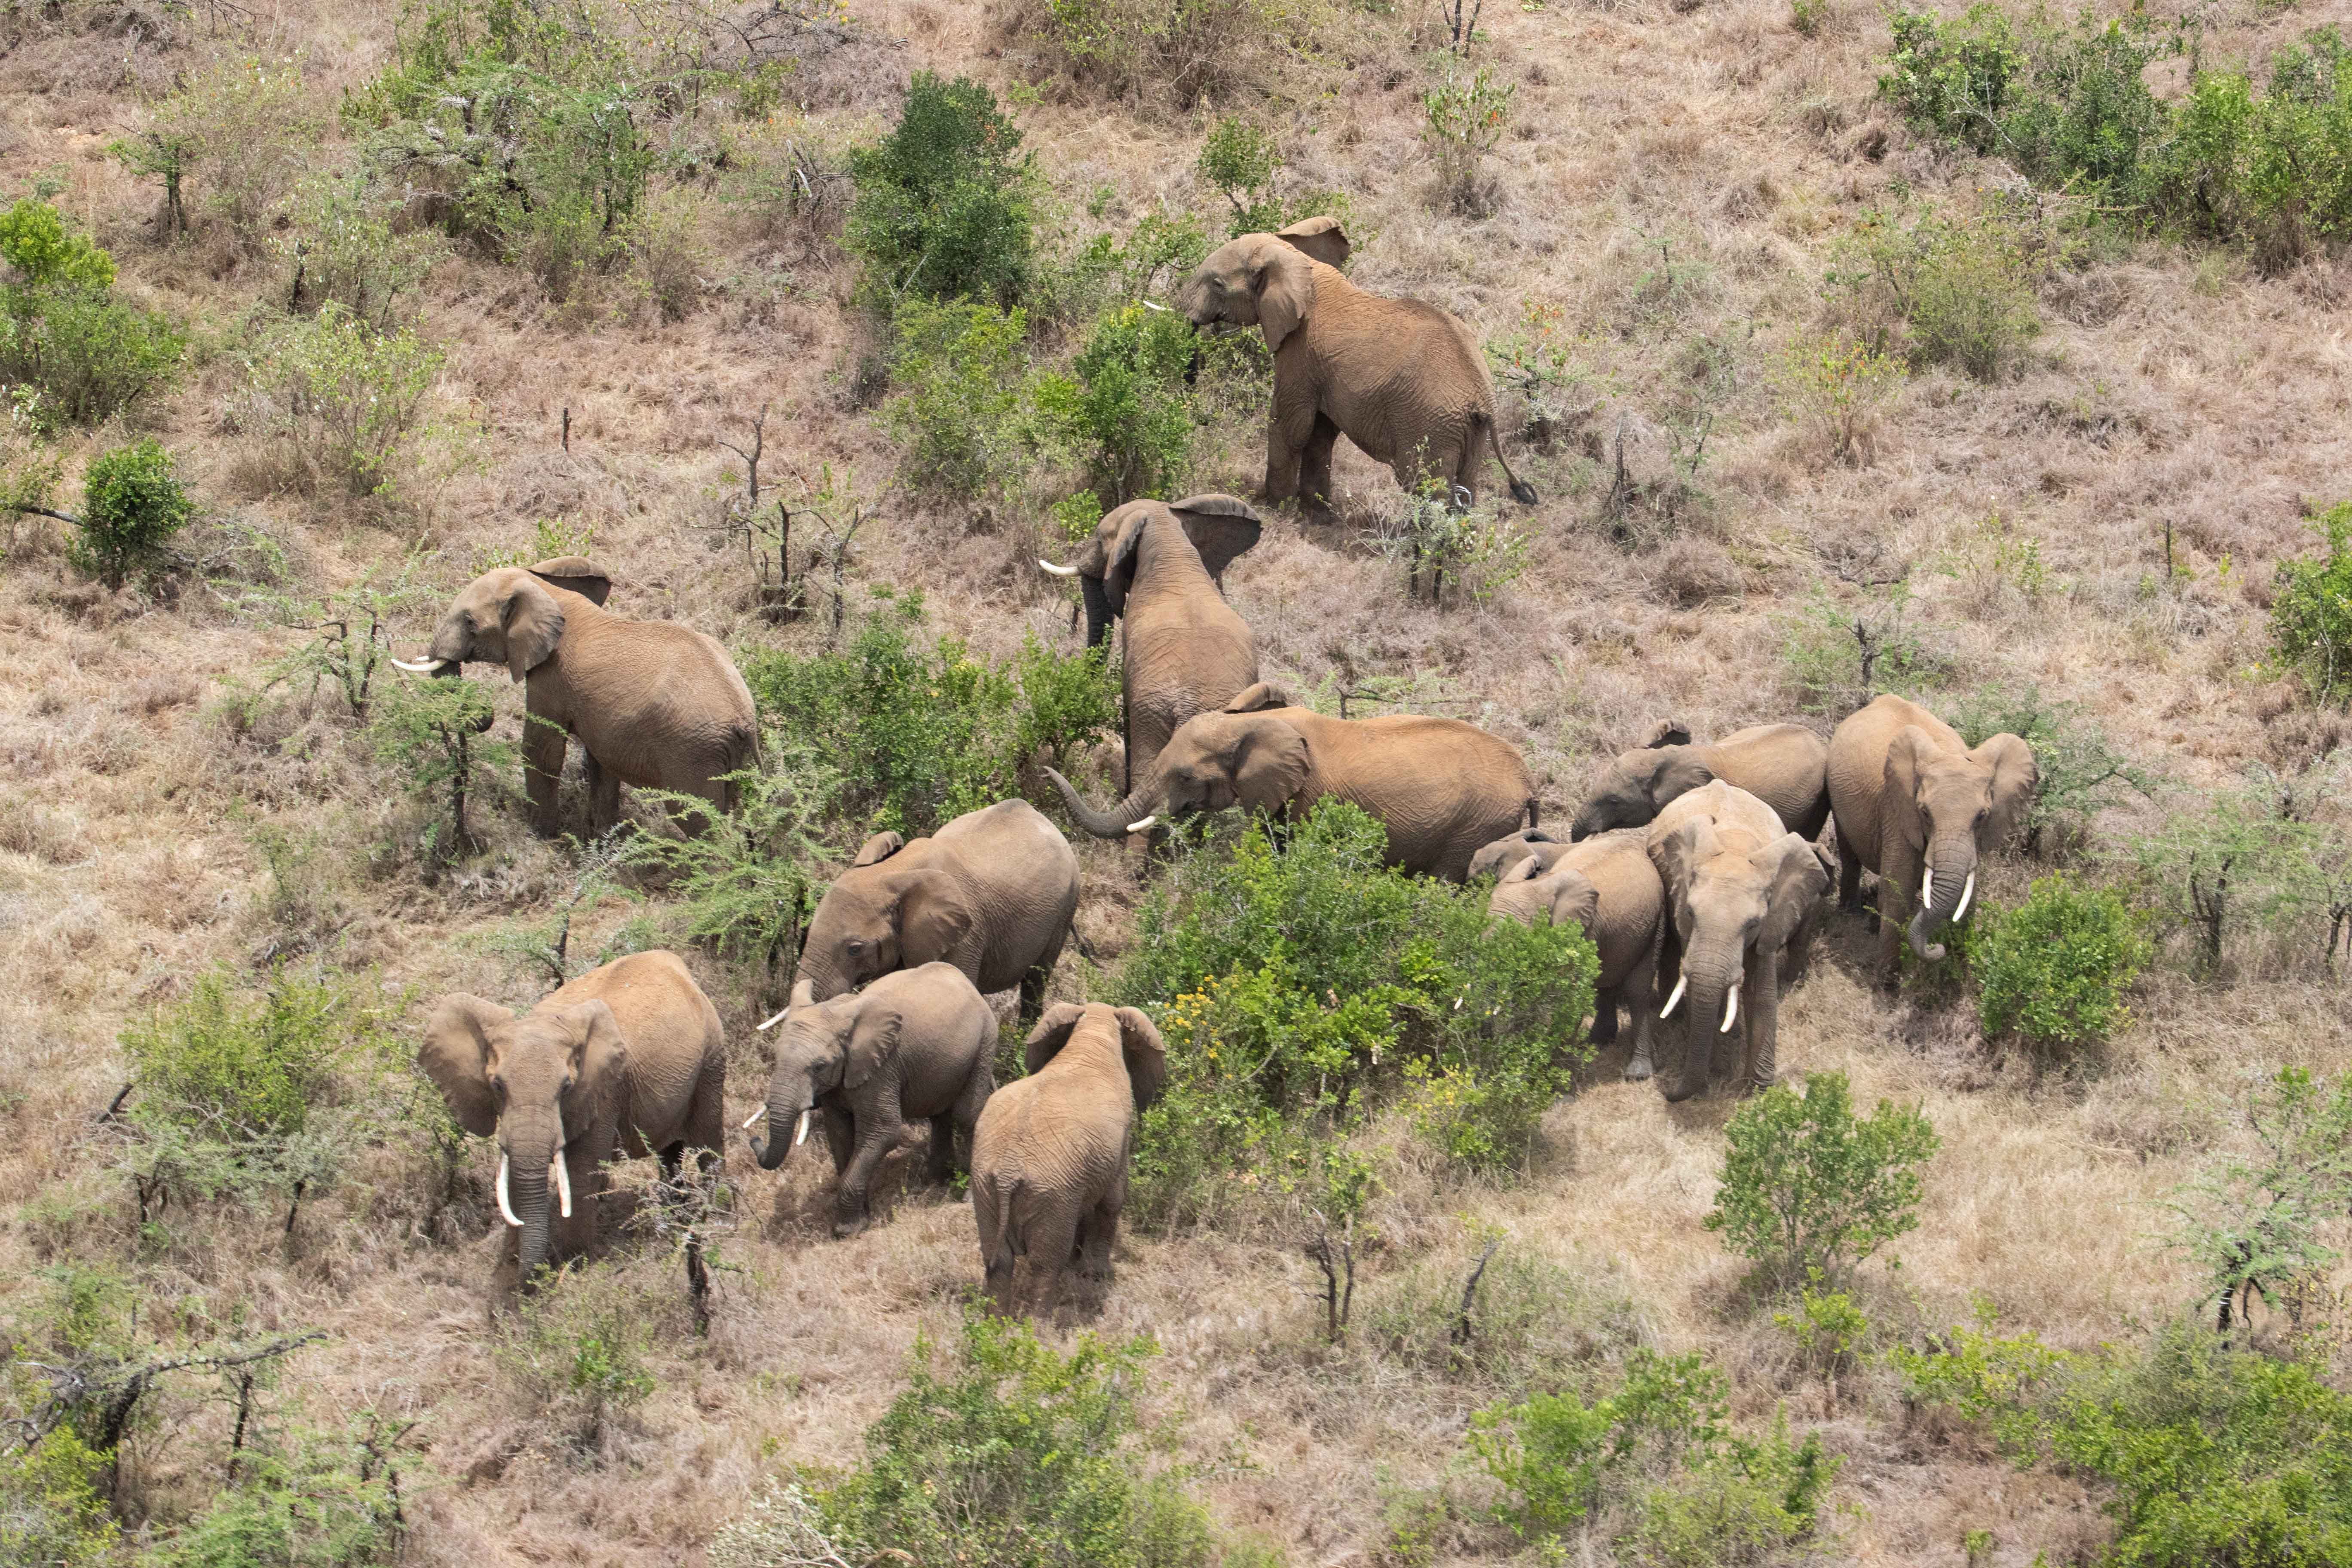 Some of the elephants were herded to a different location